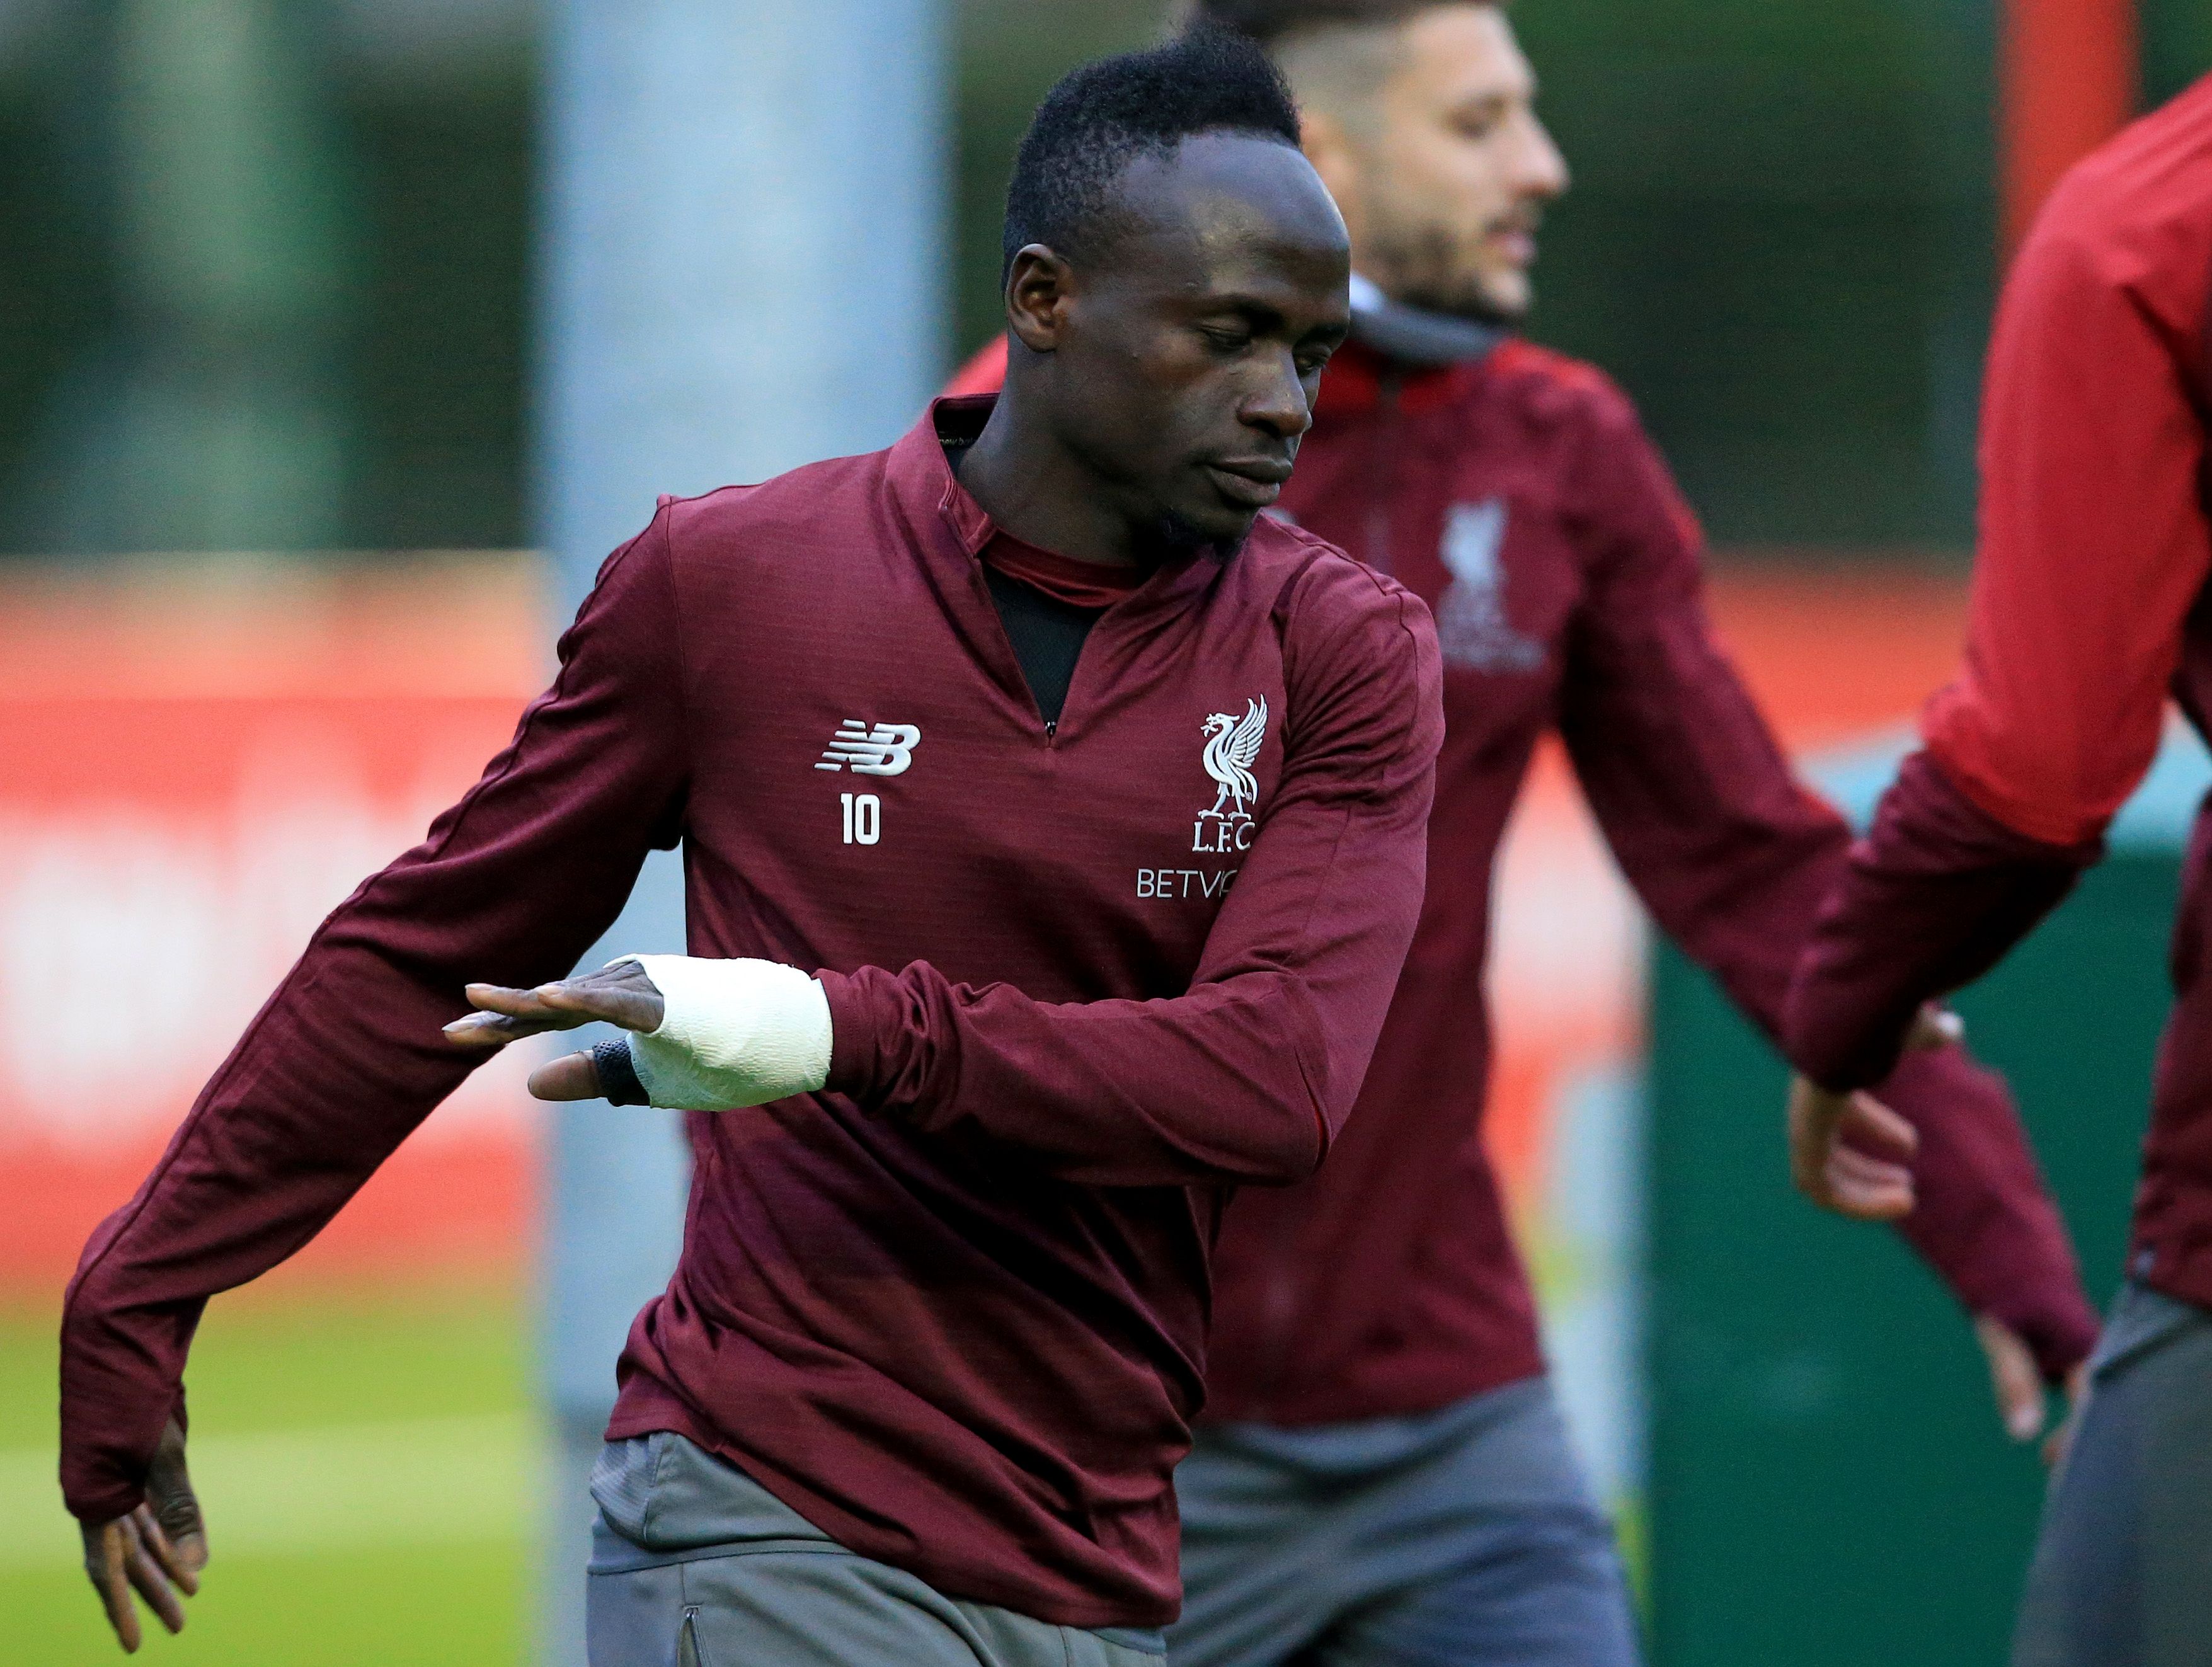 Can Mane lead Liverpool to a win? (Photo by LINDSEY PARNABY/AFP/Getty Images)